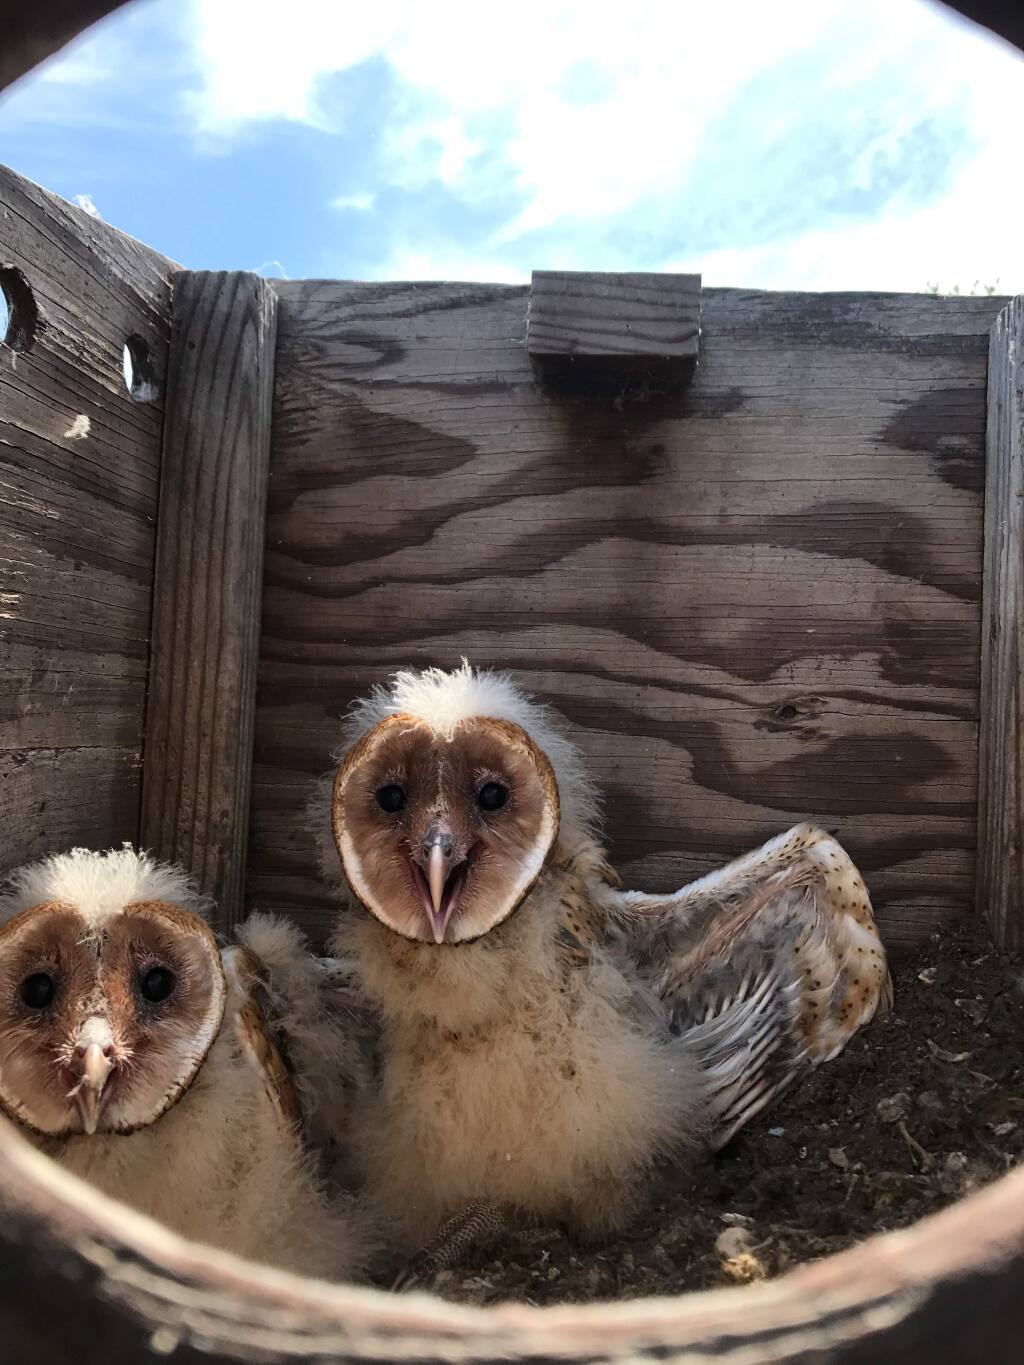 Baby barn owls, found in an unmaintained shelter box, that had fallen off the roof of a barn and was baking in the open sun. (Sonoma County Wildlife Rescue).